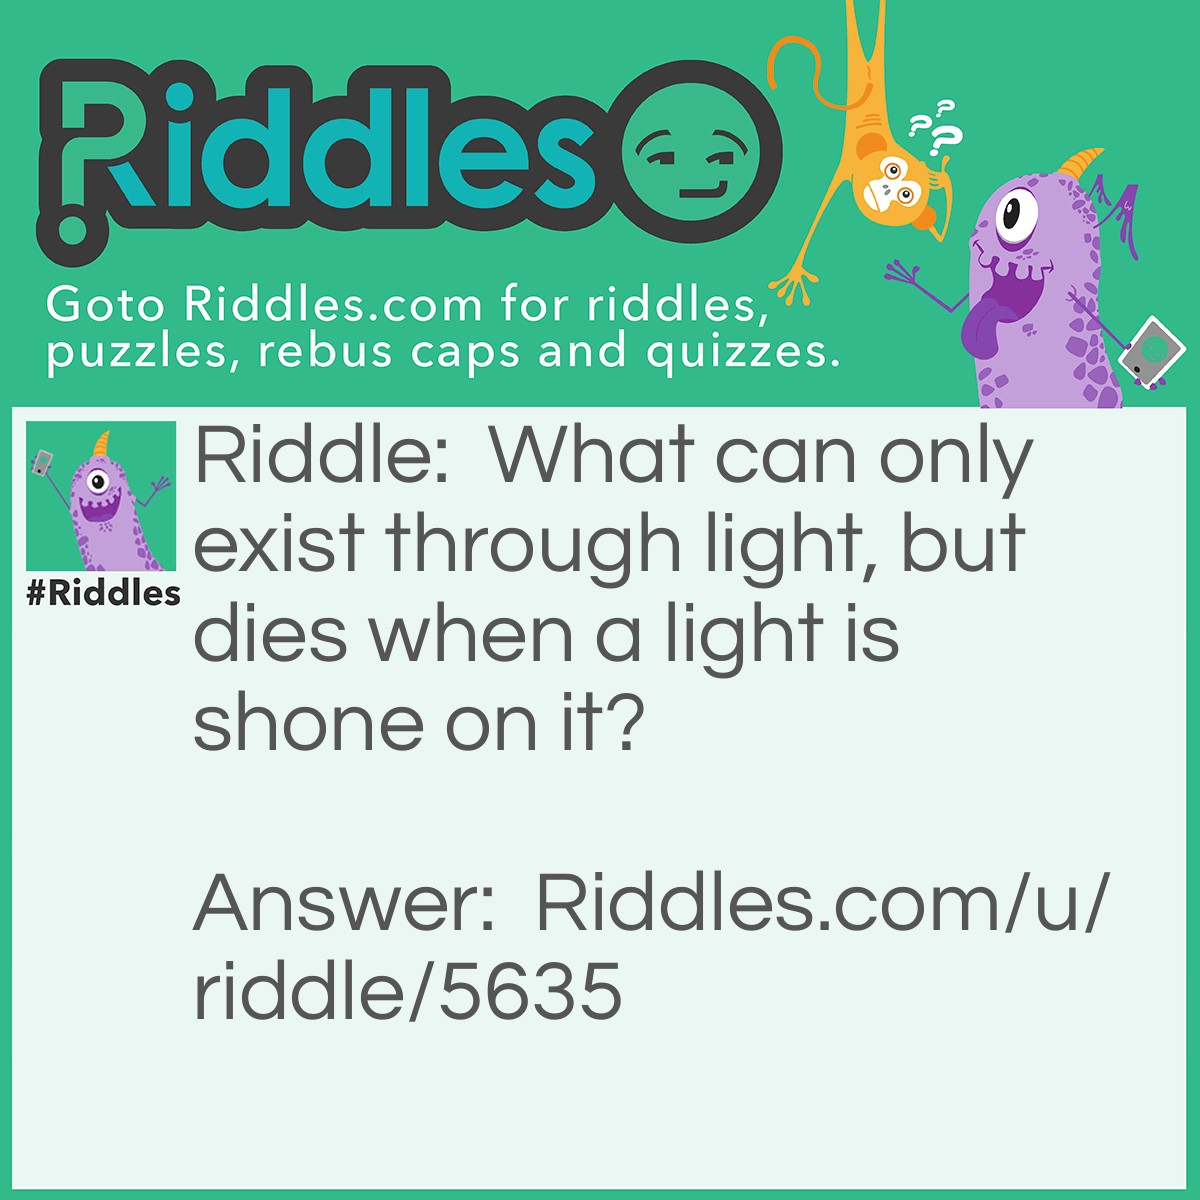 Riddle: What can only exist through light, but dies when a light is shone on it? Answer: A shadow.